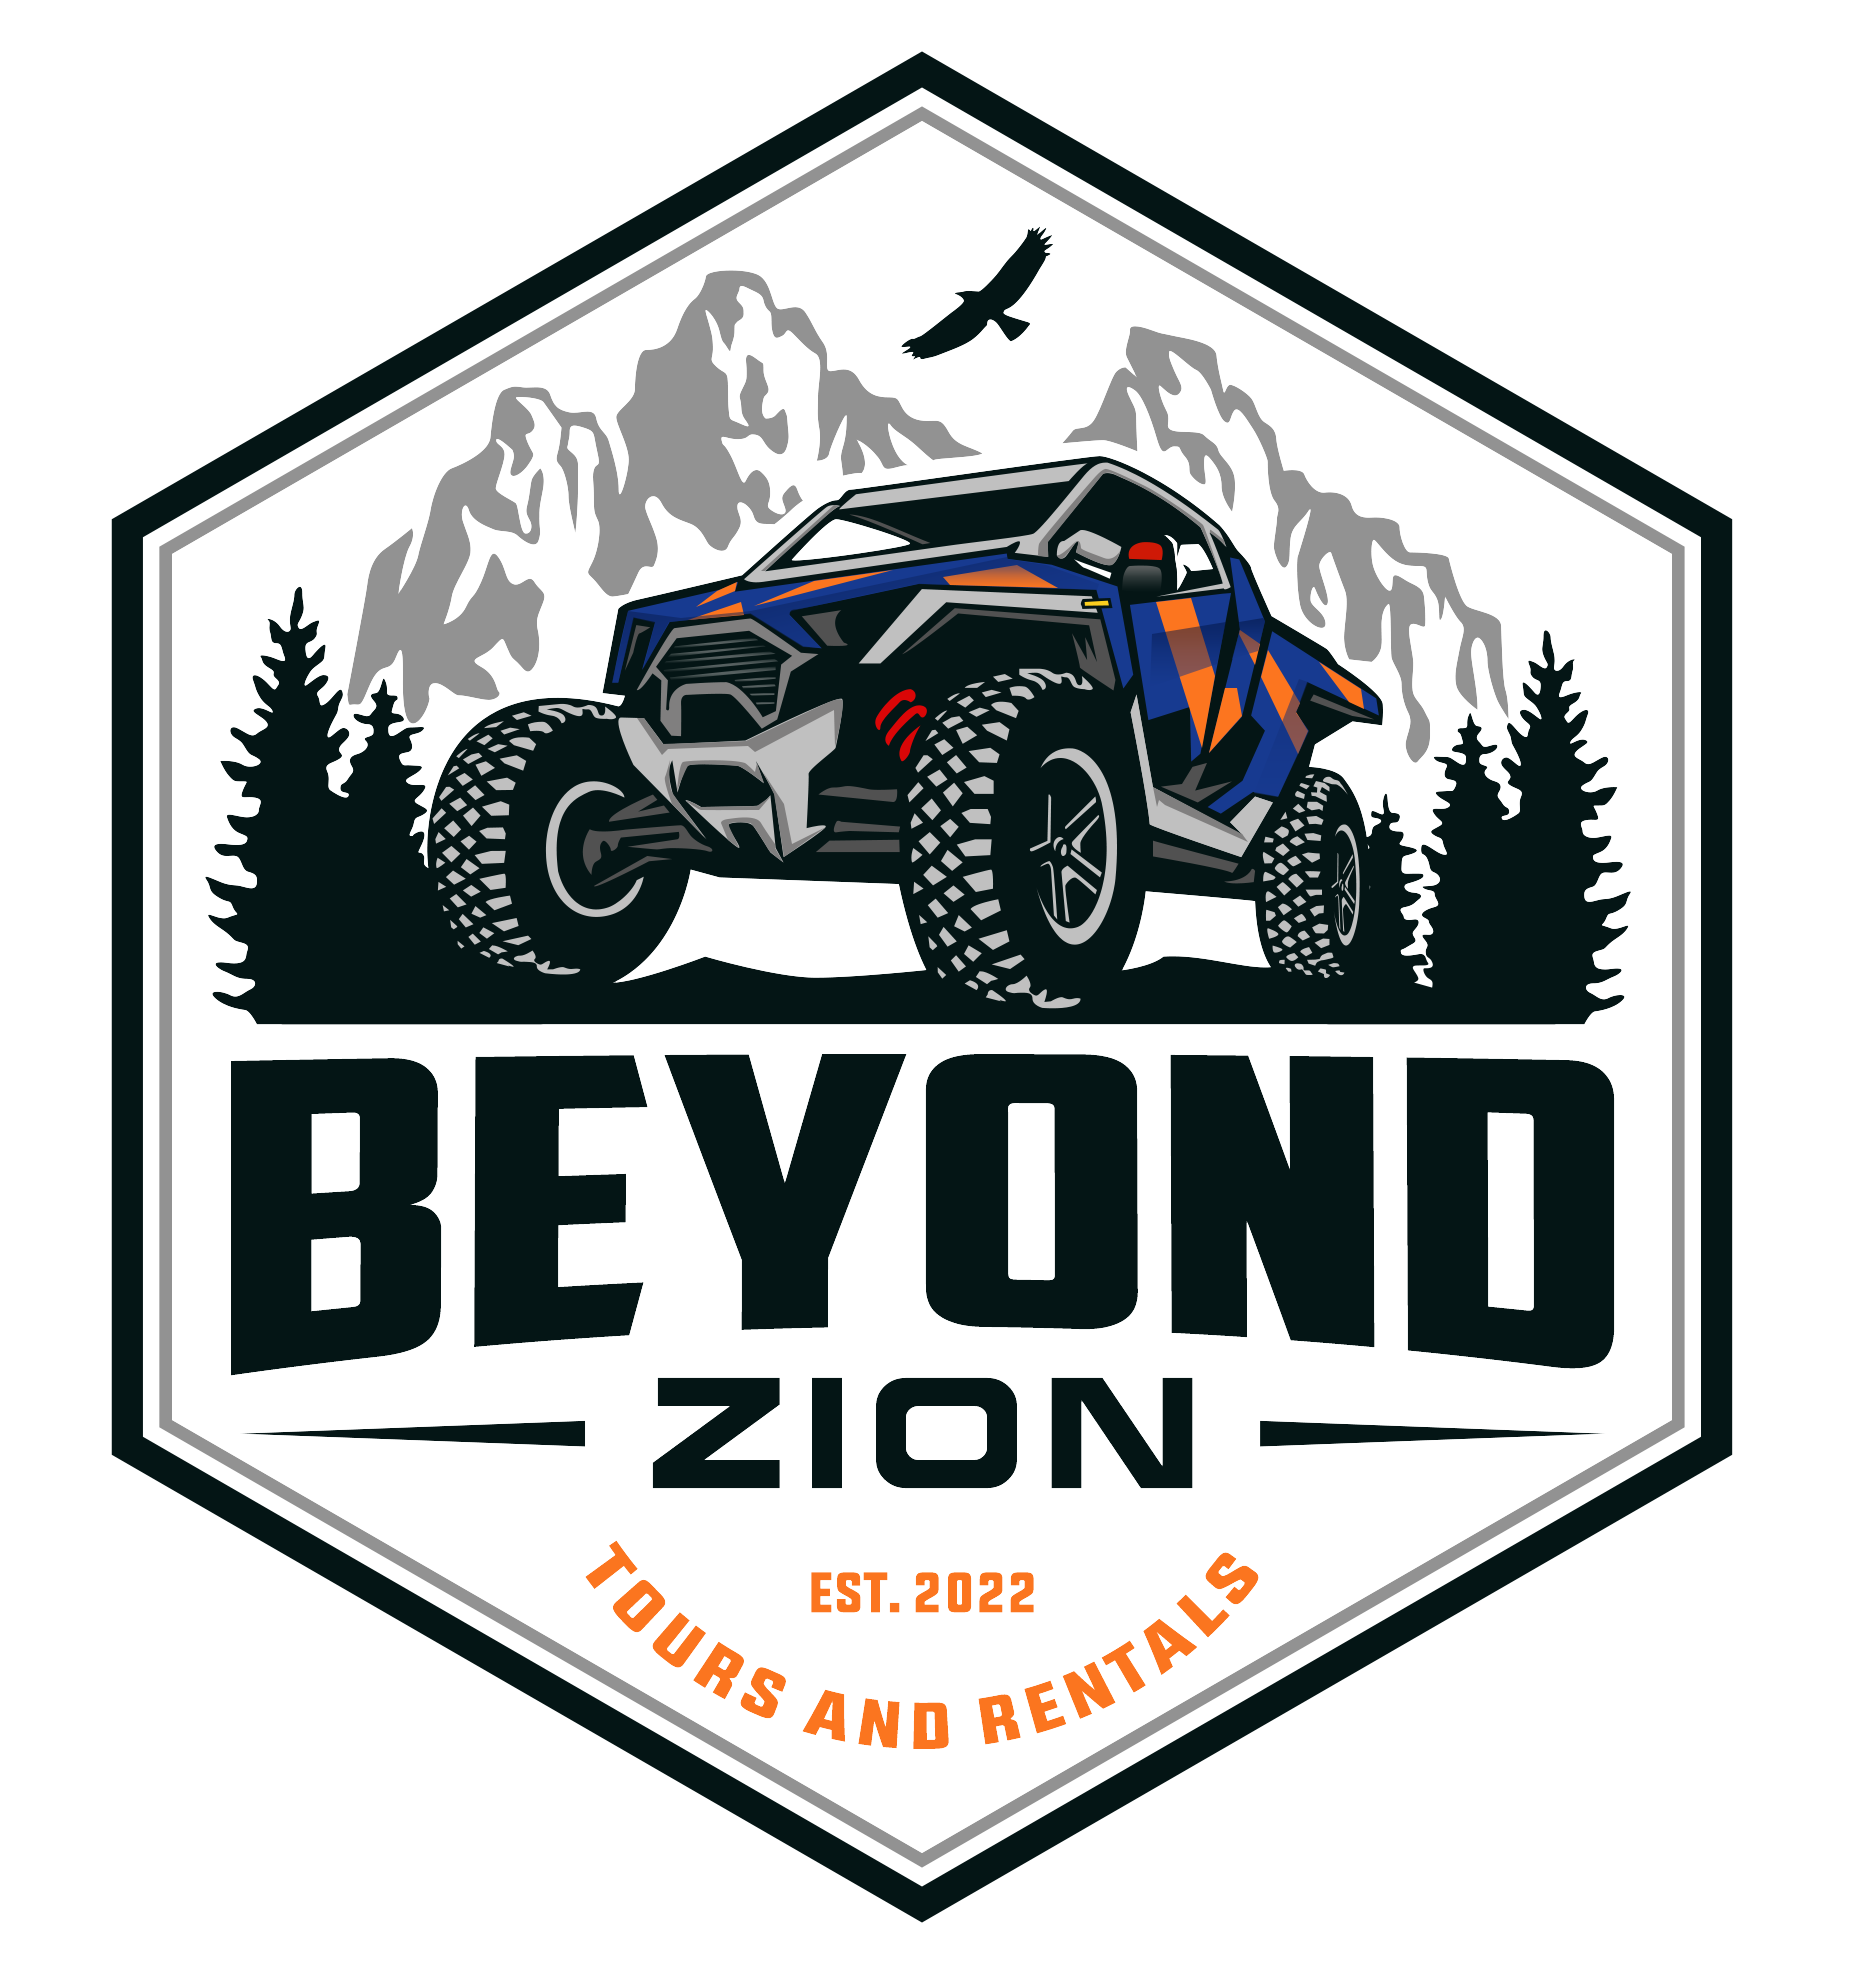 Beyond Zion Tours and Rentals